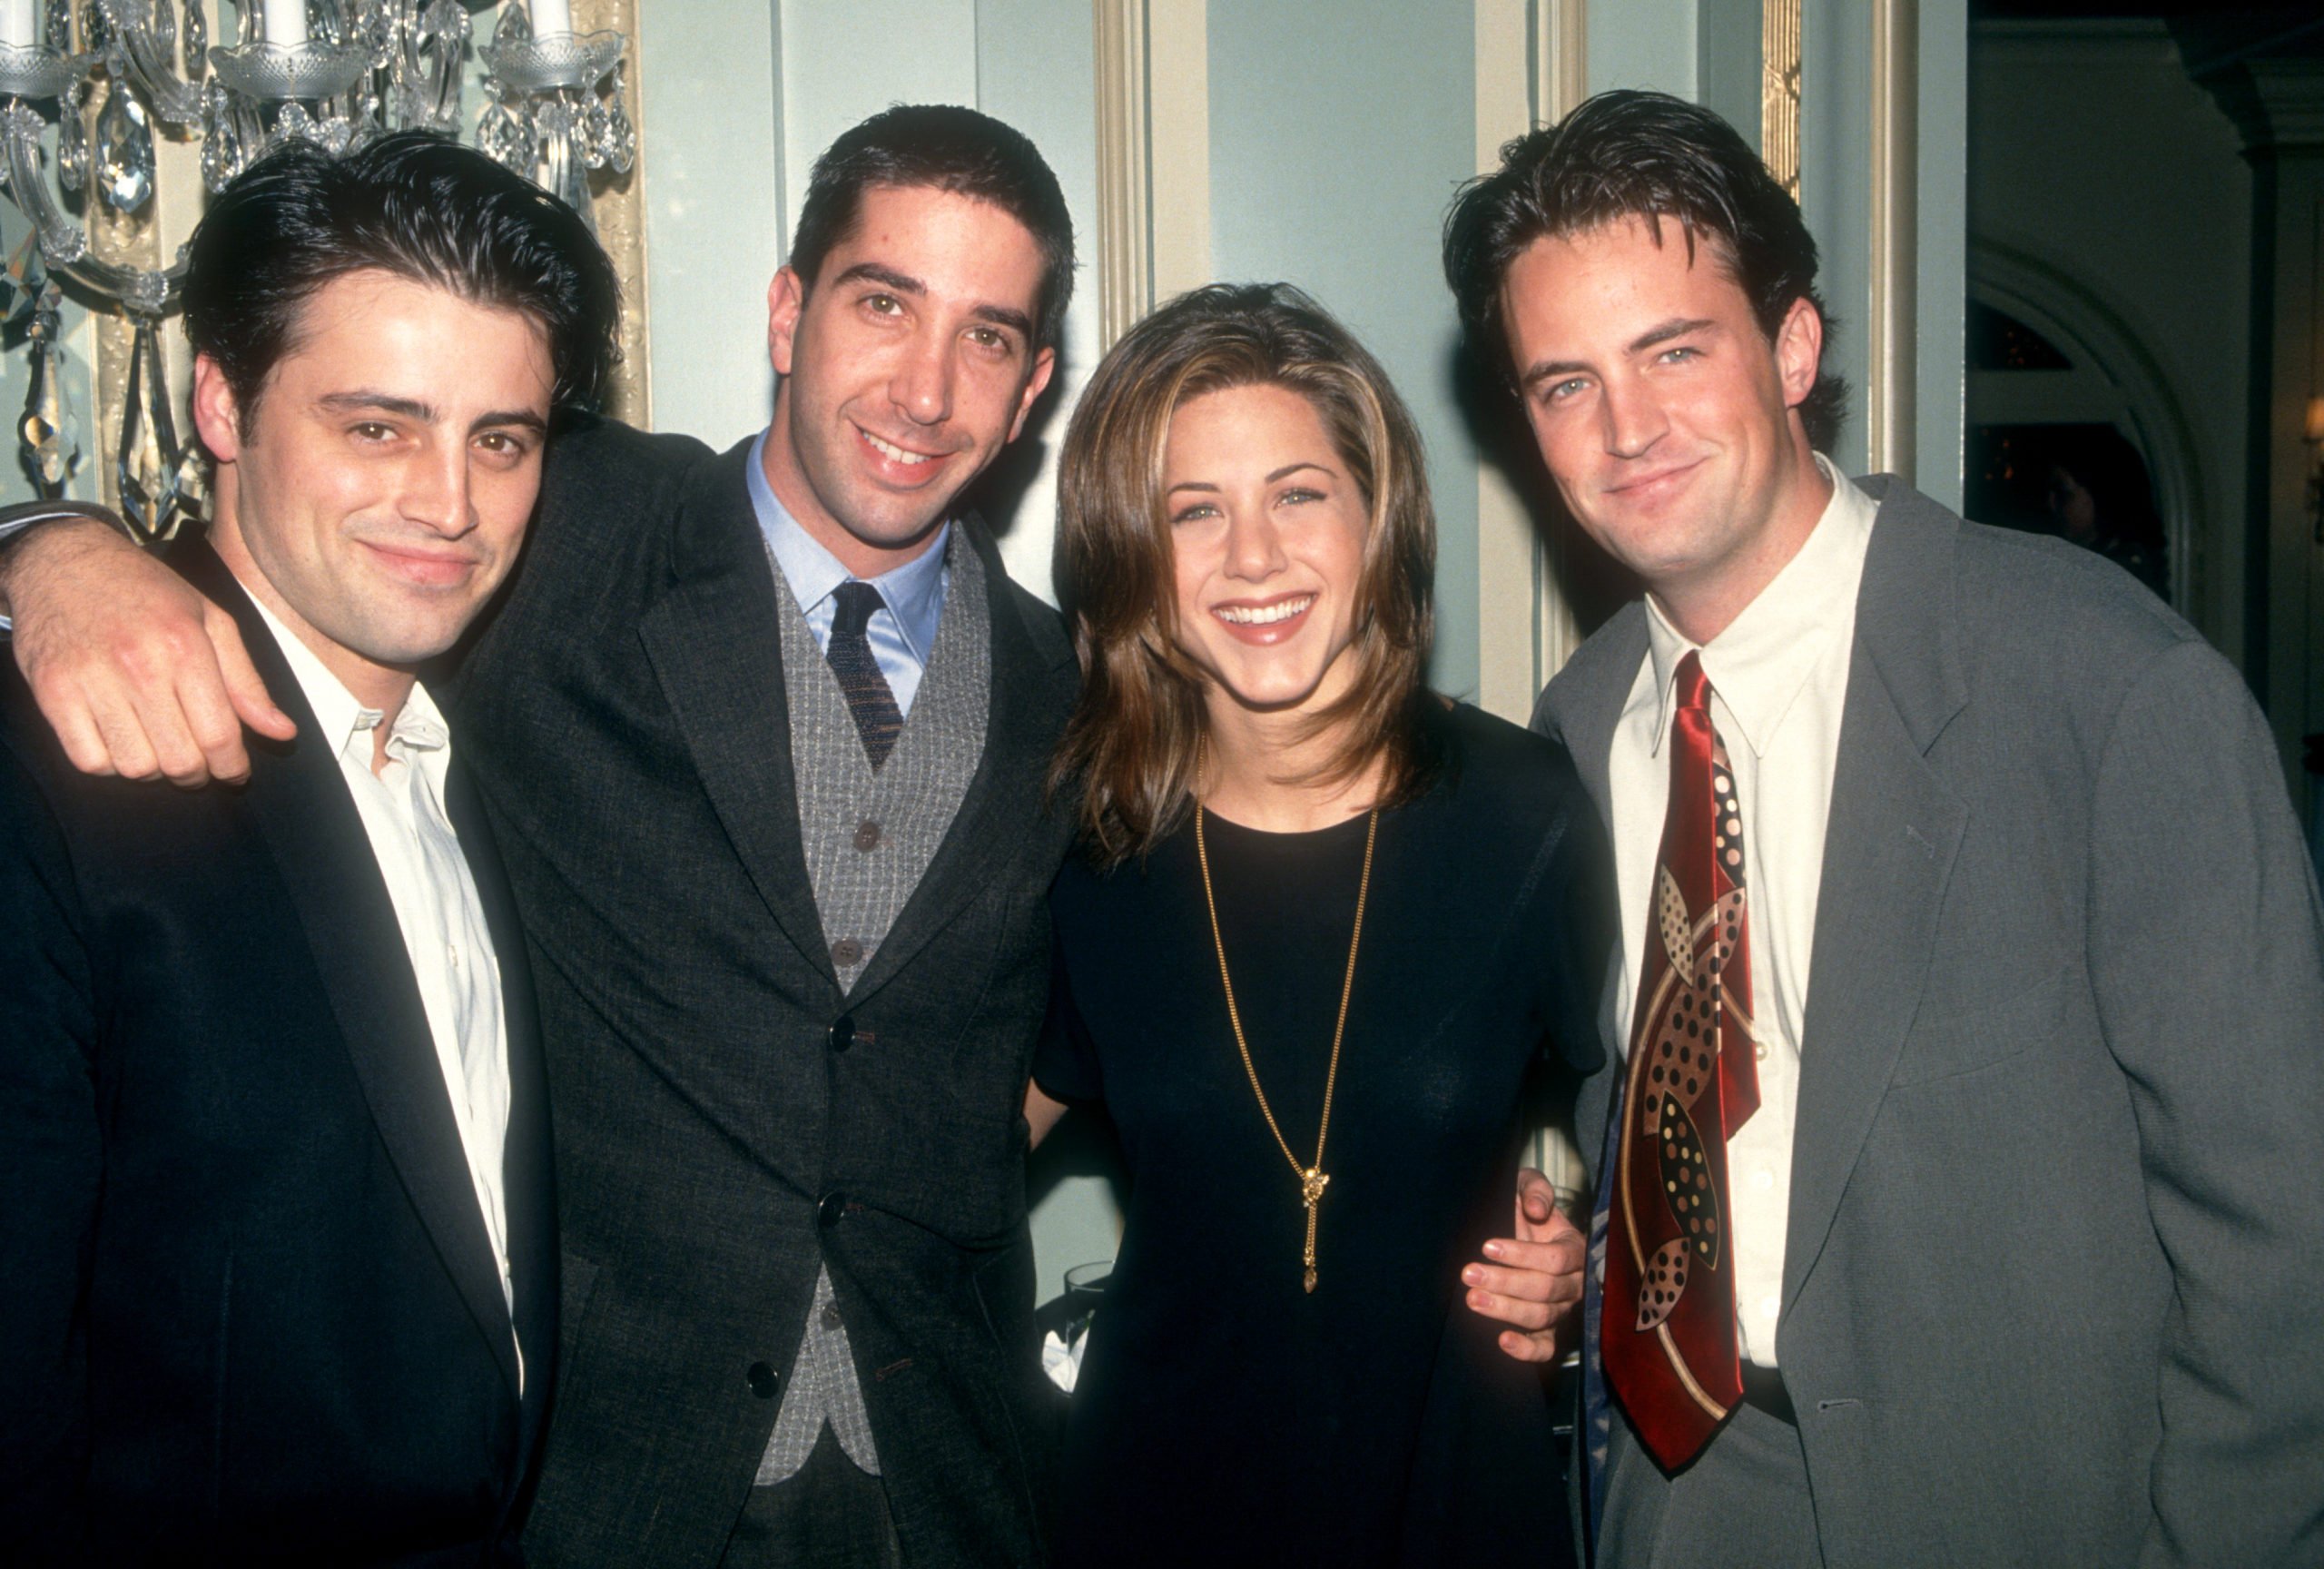 LOS ANGELES, CA - JANUARY 9:  American actors Matt LeBlanc, David Schwimmer, Jennifer Aniston and Matthew Perry of the television comedy, Friend's pose for a portrait during an NBC Press Tour Party on January 9, 1995 in Los Angeles, California.  (Photo by Ron Davis/Getty Images)